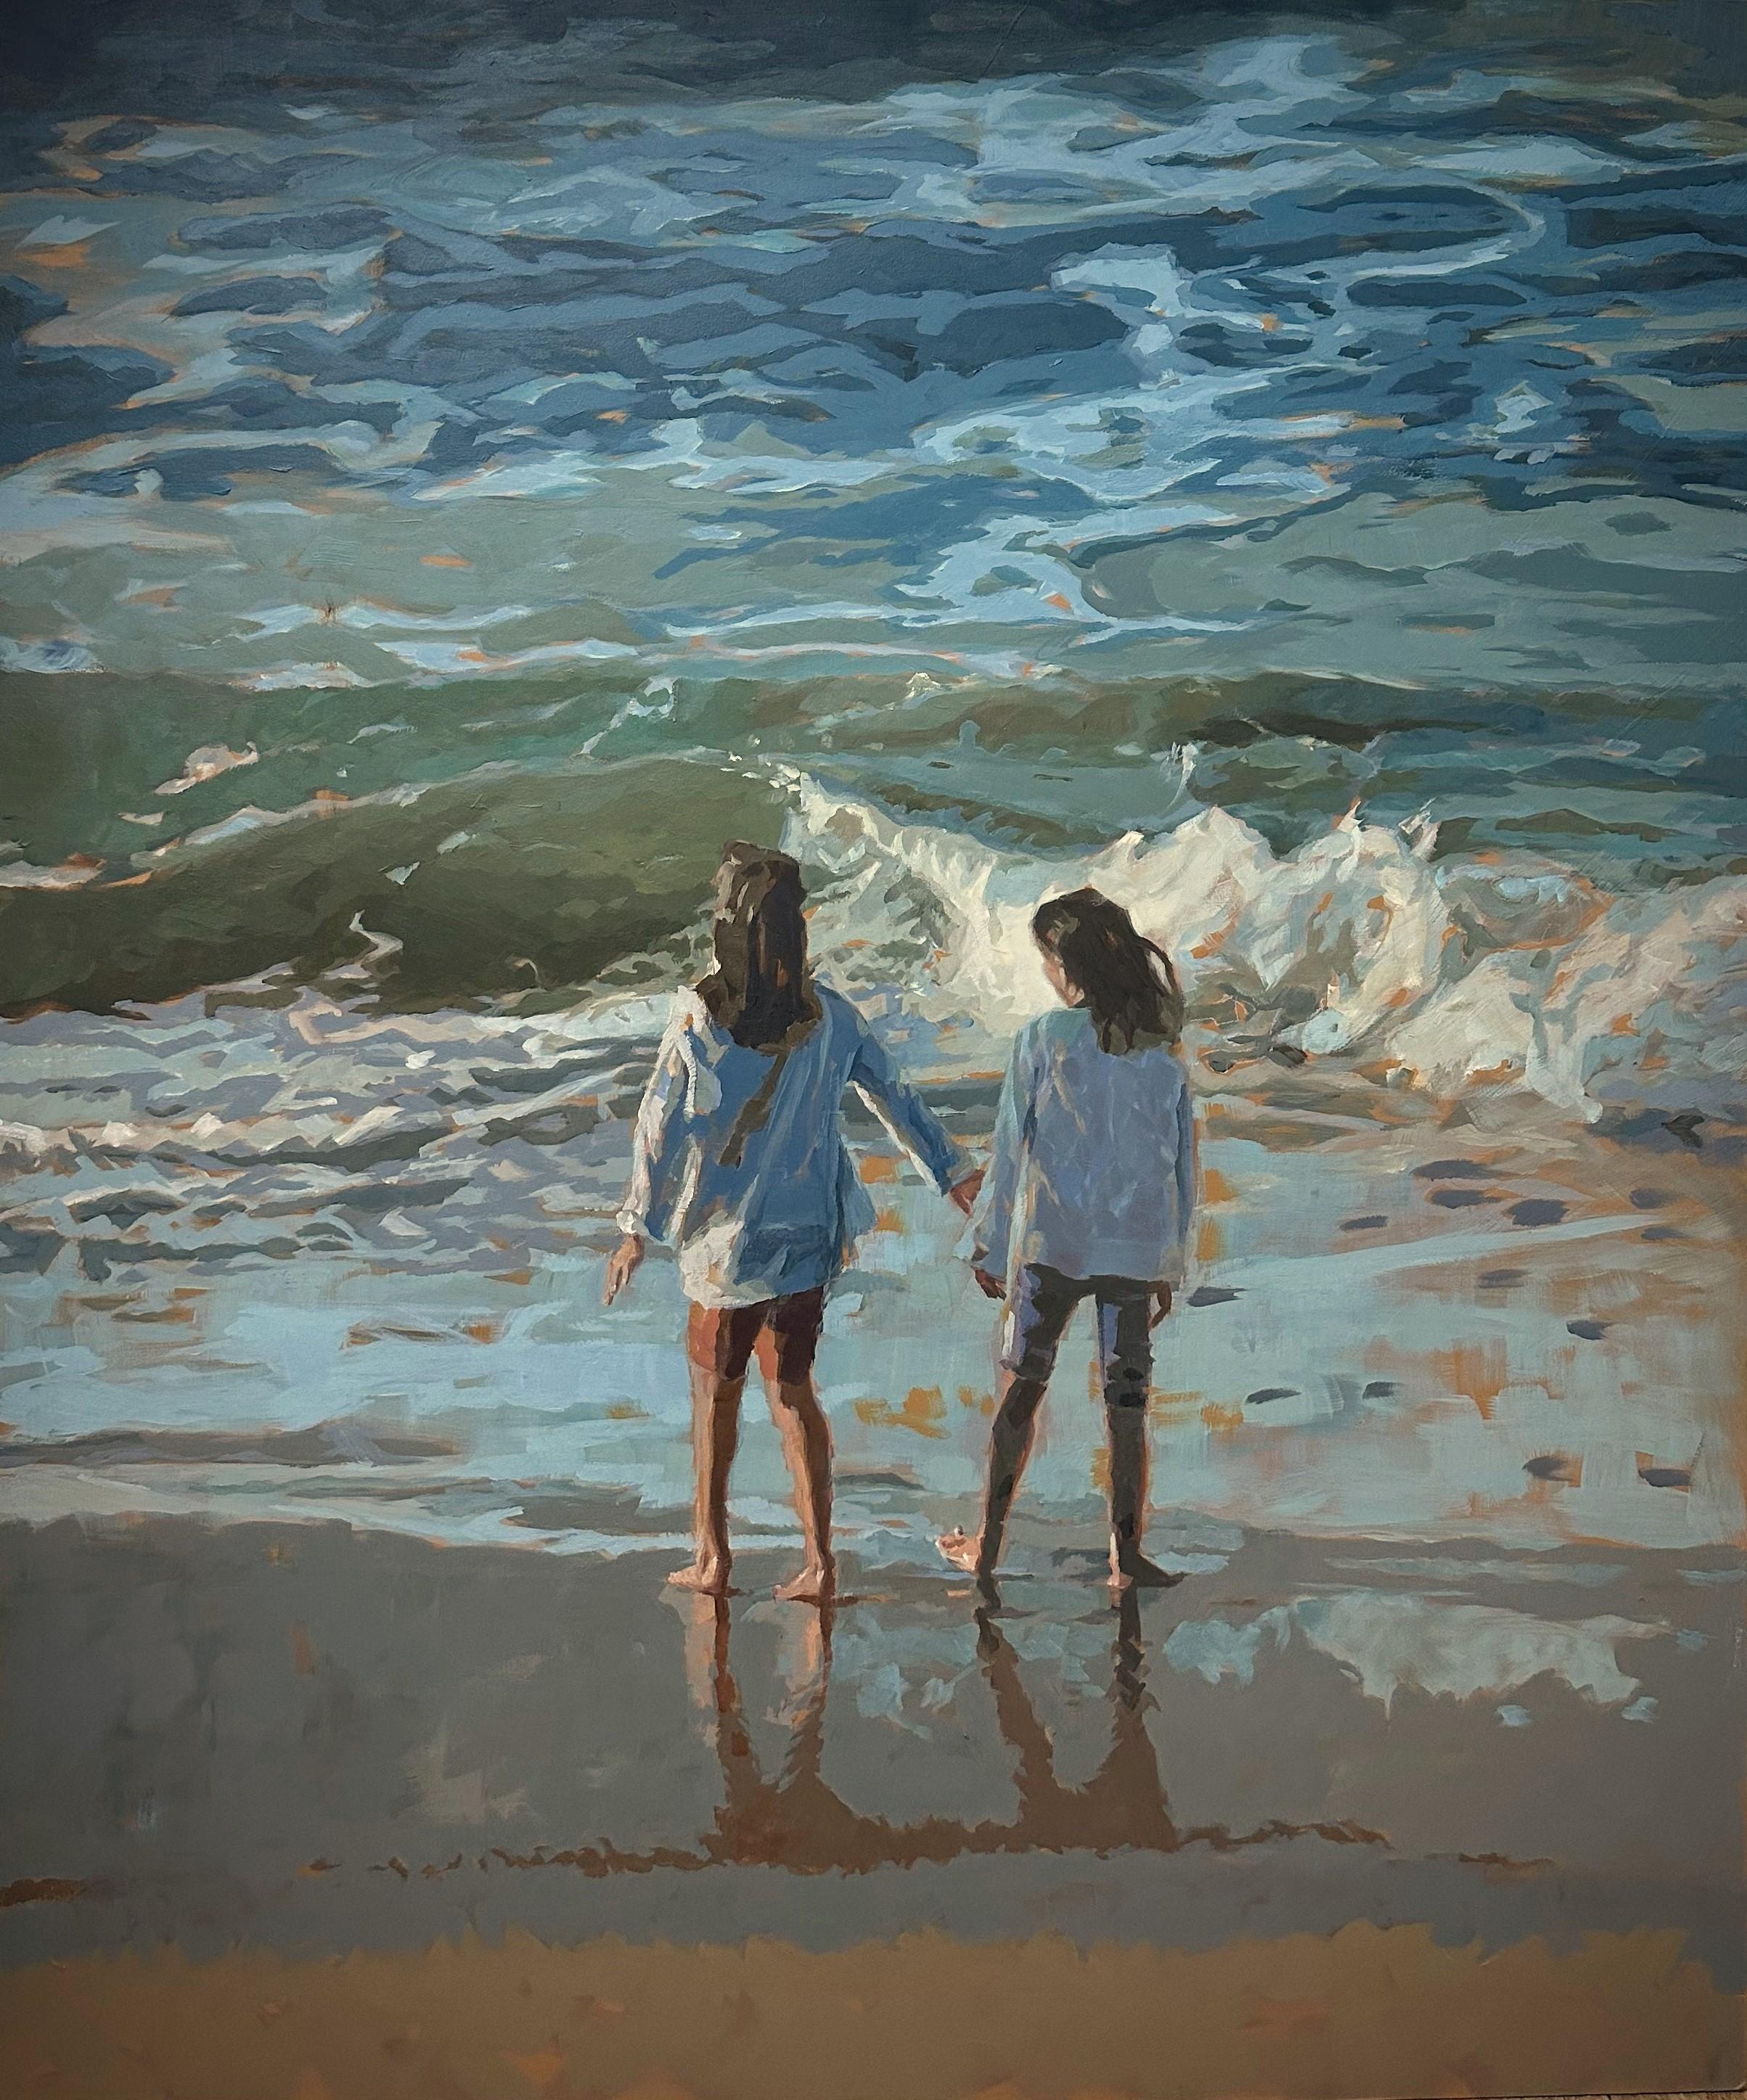 Mitzy Renooy Figurative Painting - The Sea- 21st Century Contemporary Painting of two girls standing on the beach